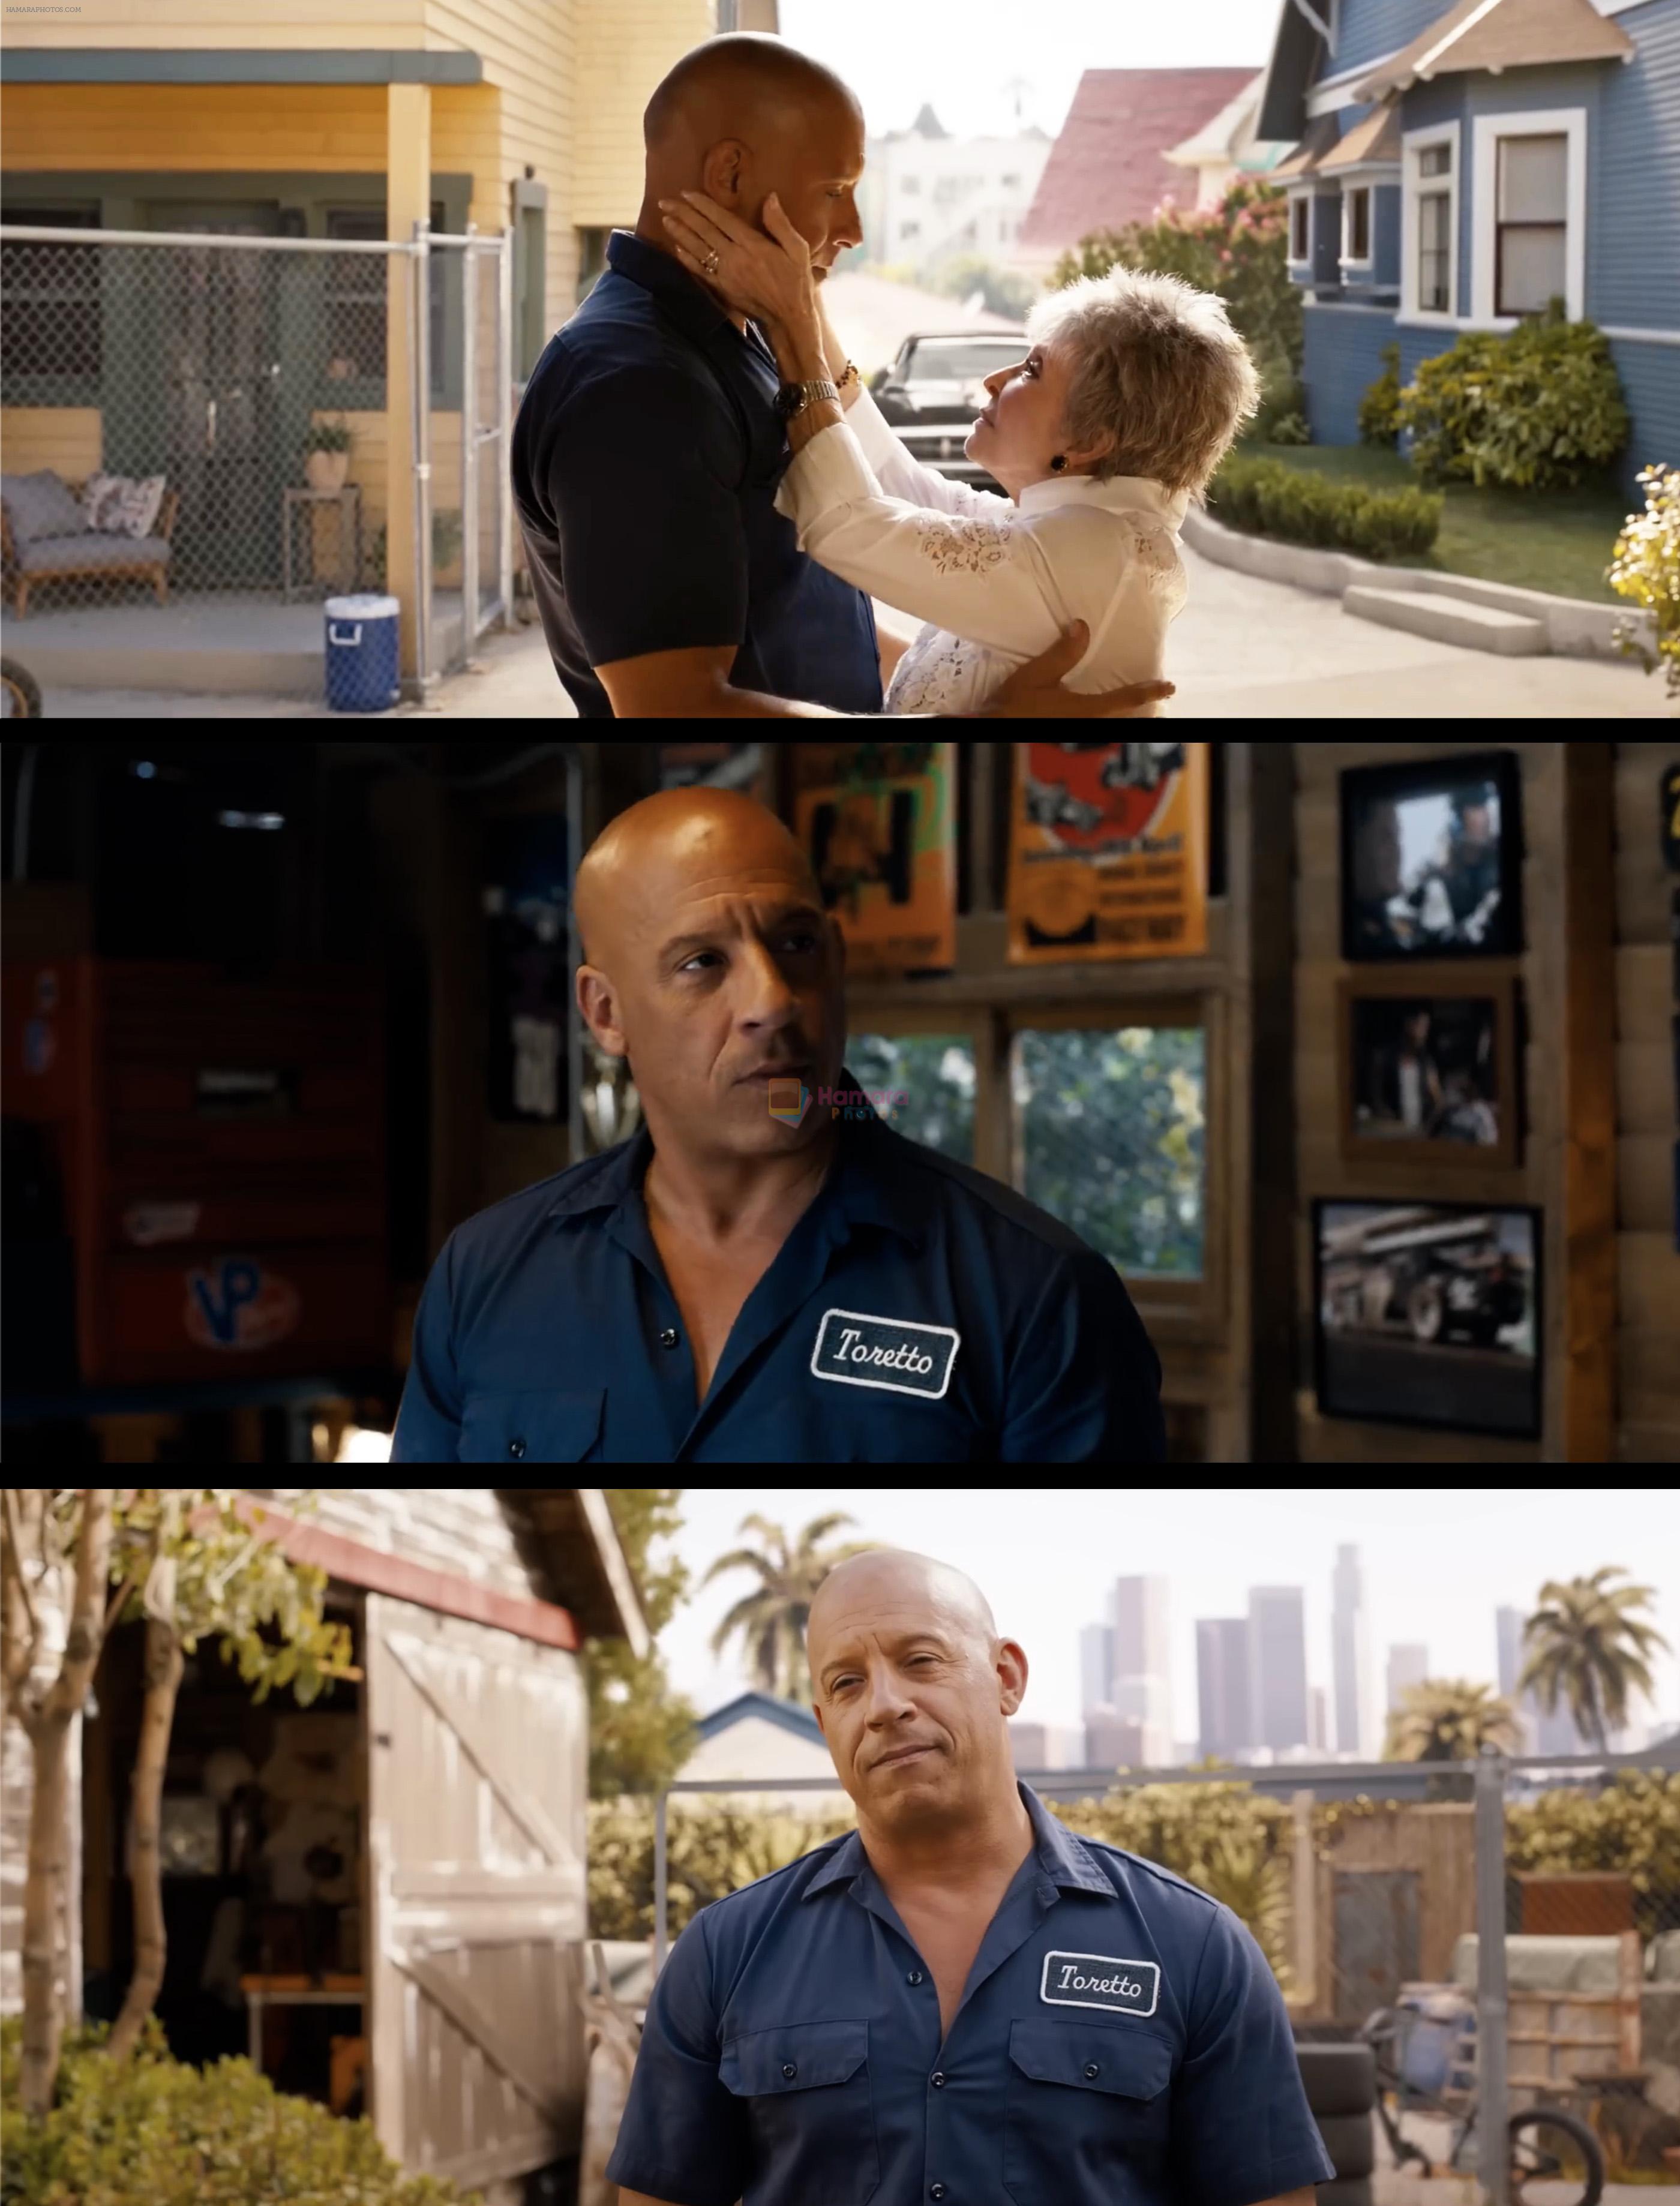 Vin Diesel as Dominic Toretto in Still from movie Fast X